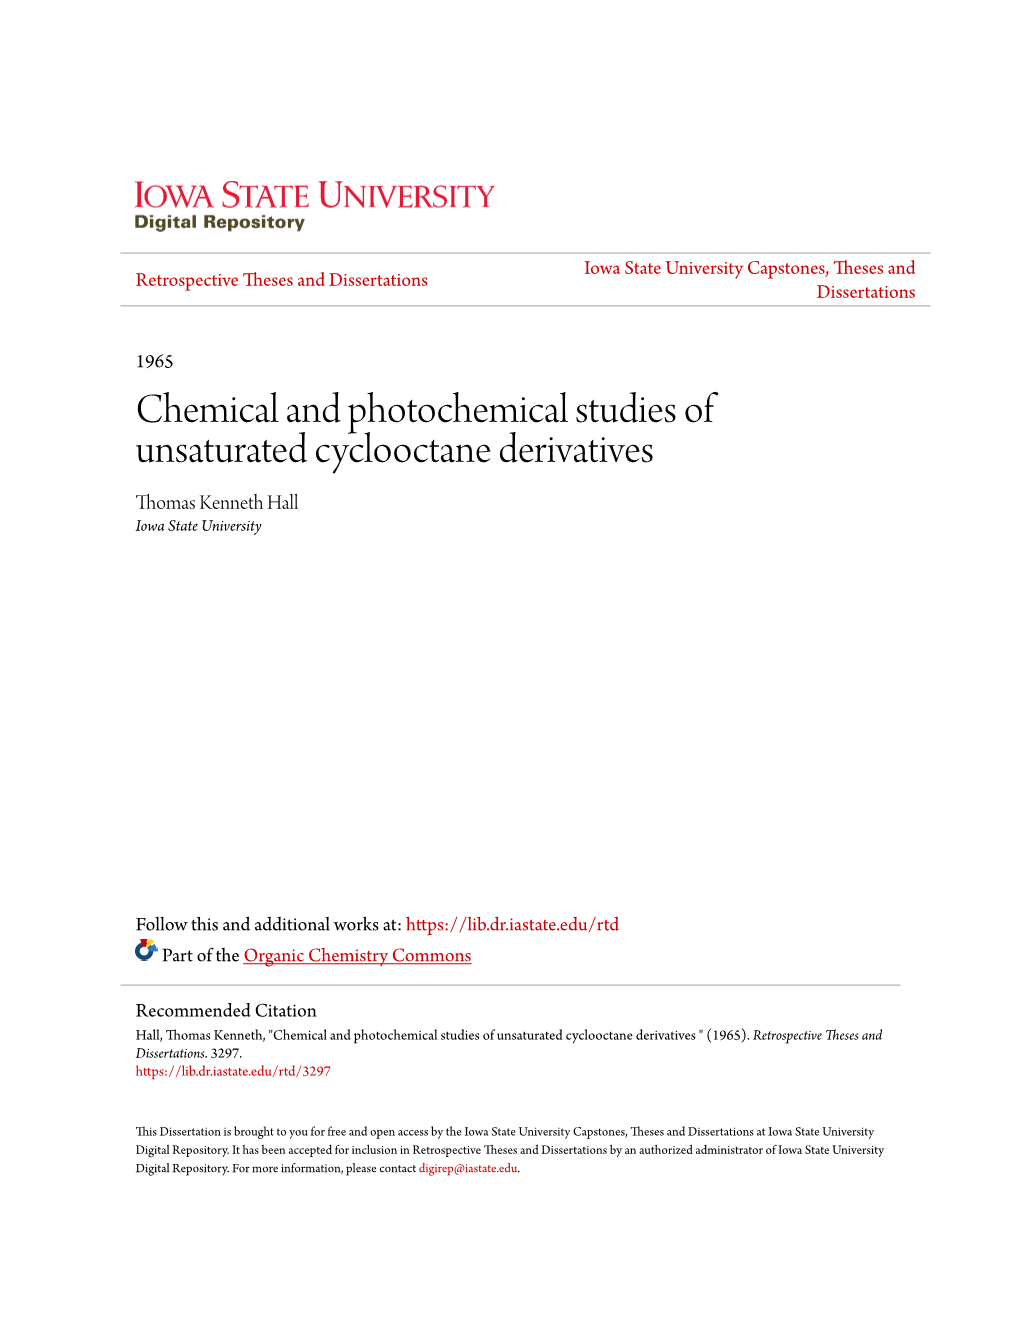 Chemical and Photochemical Studies of Unsaturated Cyclooctane Derivatives Thomas Kenneth Hall Iowa State University